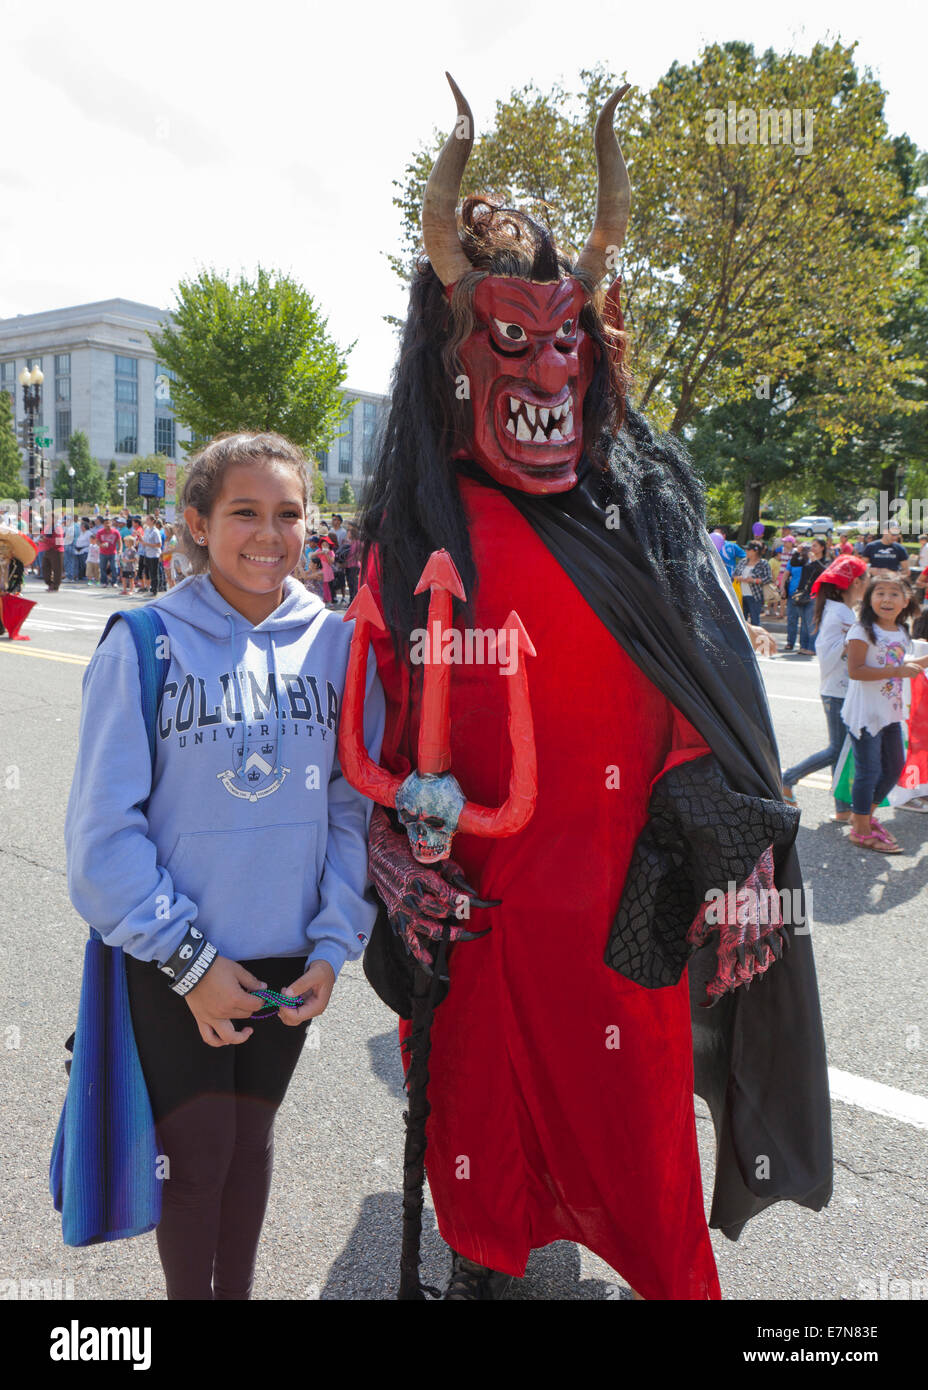 Woman posing for pictures with El diablo (The devil) character at Latin festival - Washington, DC USA Stock Photo